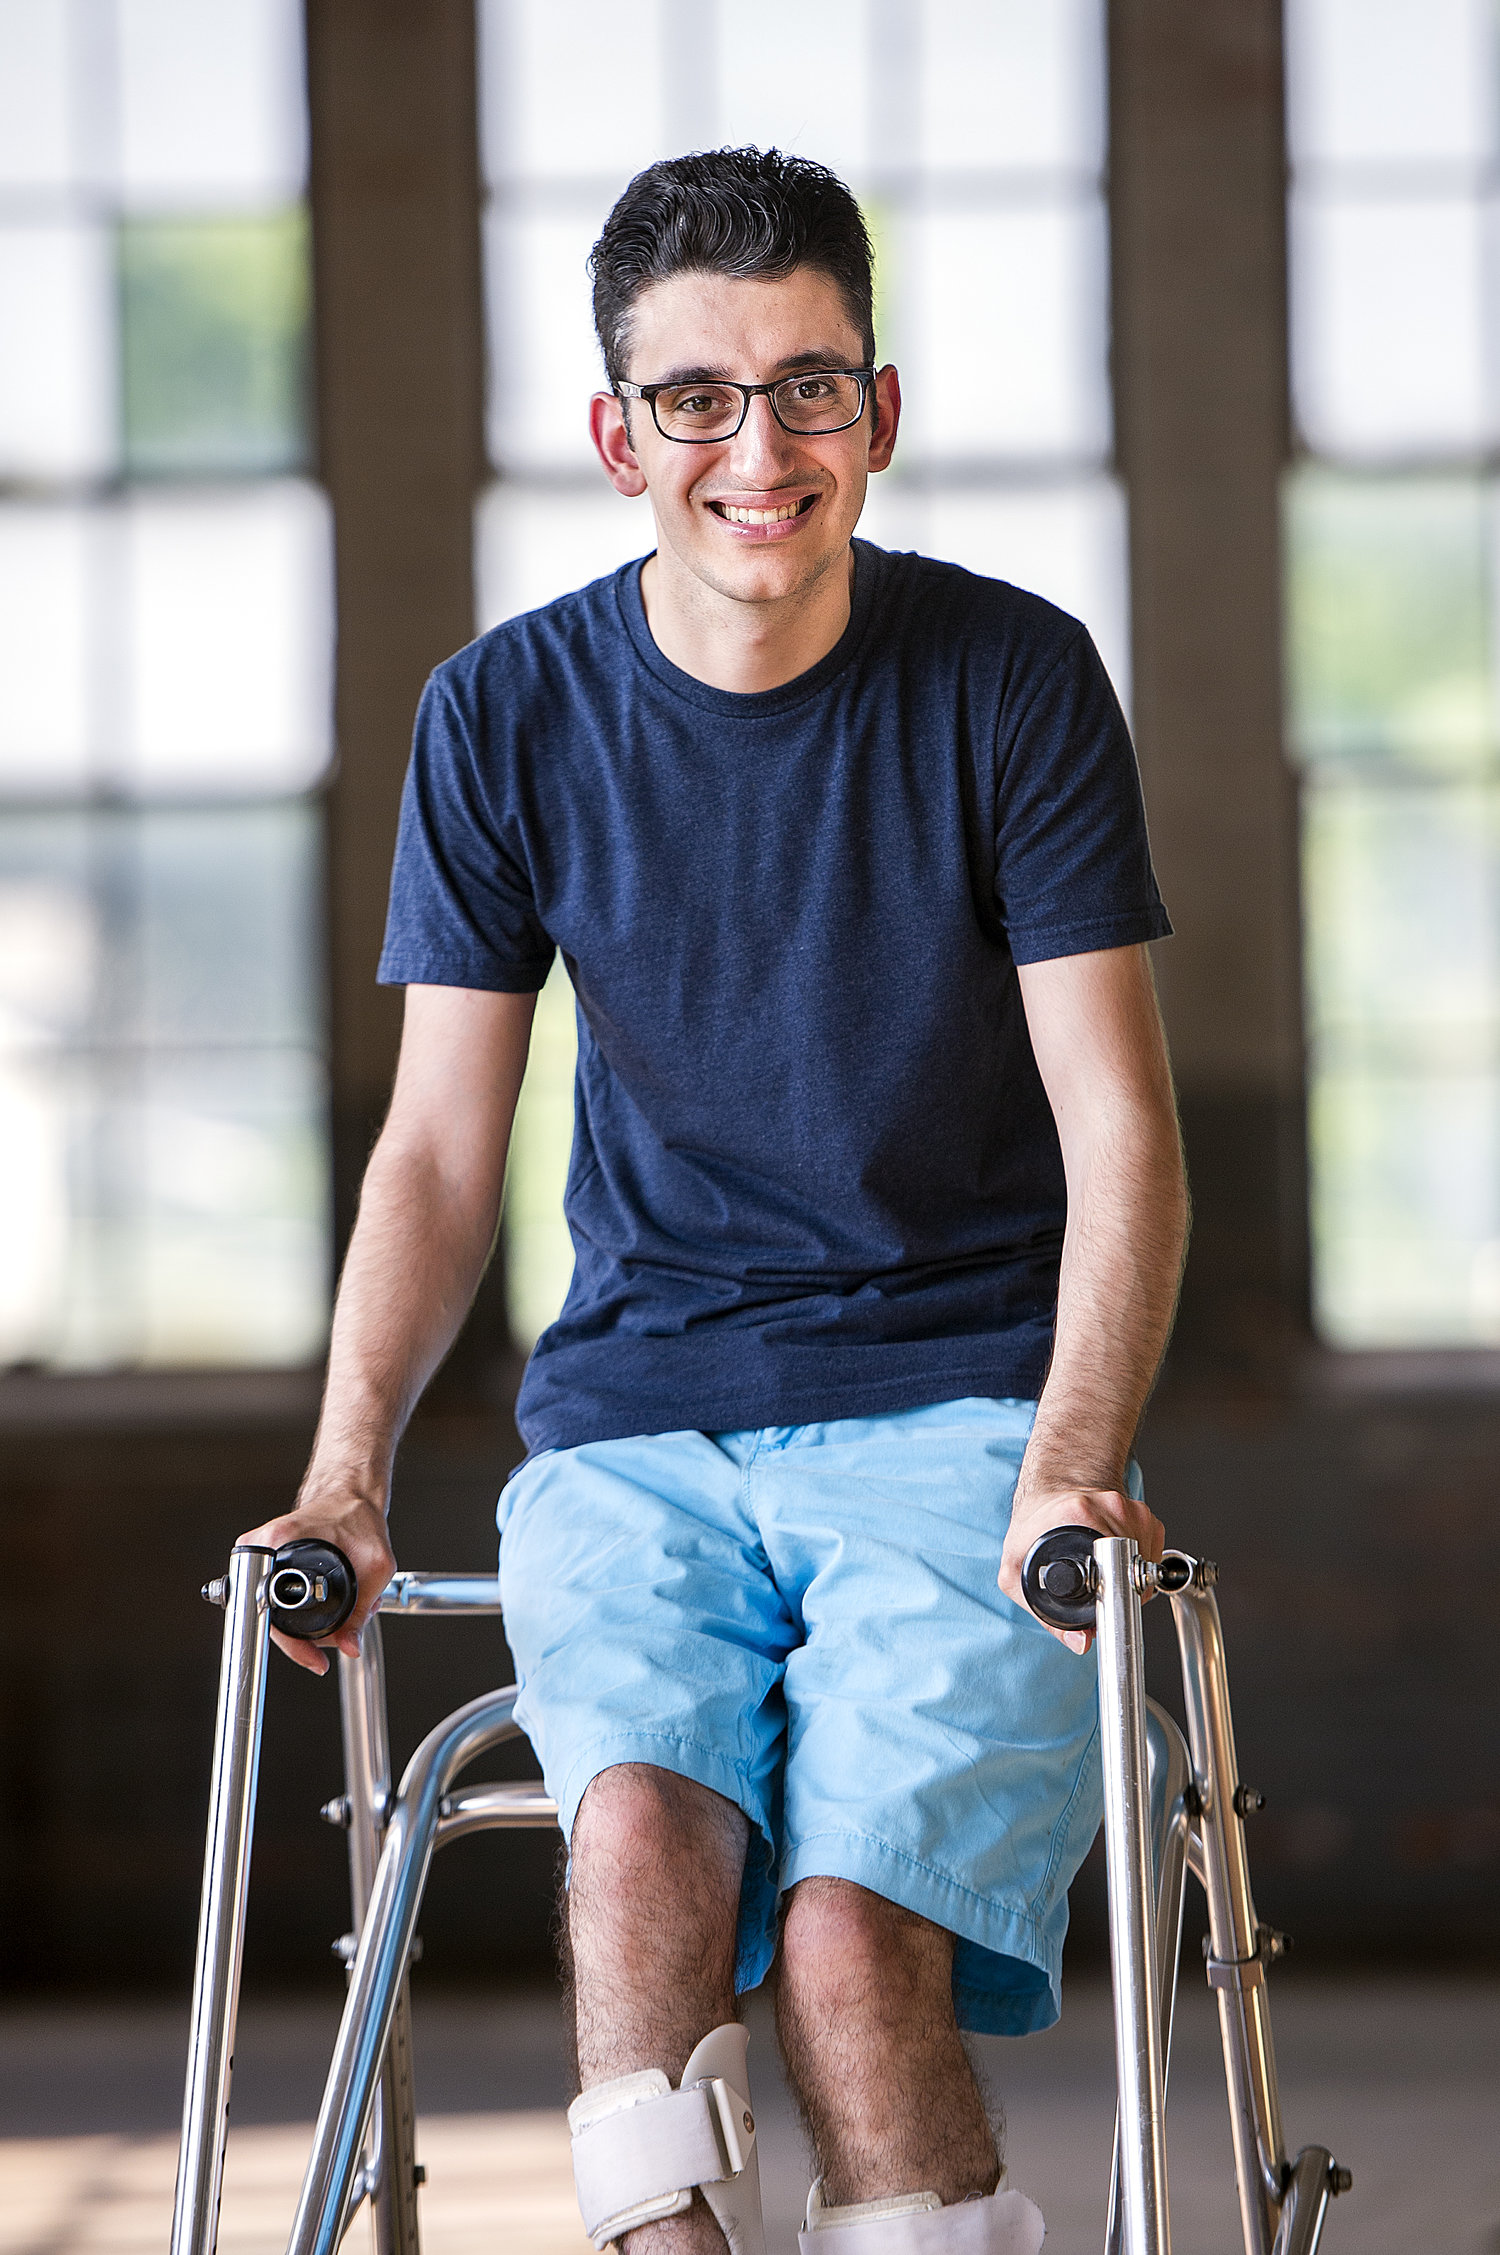 Ryan Haddad smiling with windows behind him. He is a Lebanese American man with short black hair and glasses who uses a walker. He is wearing a navy t-shirt and bright blue shorts.